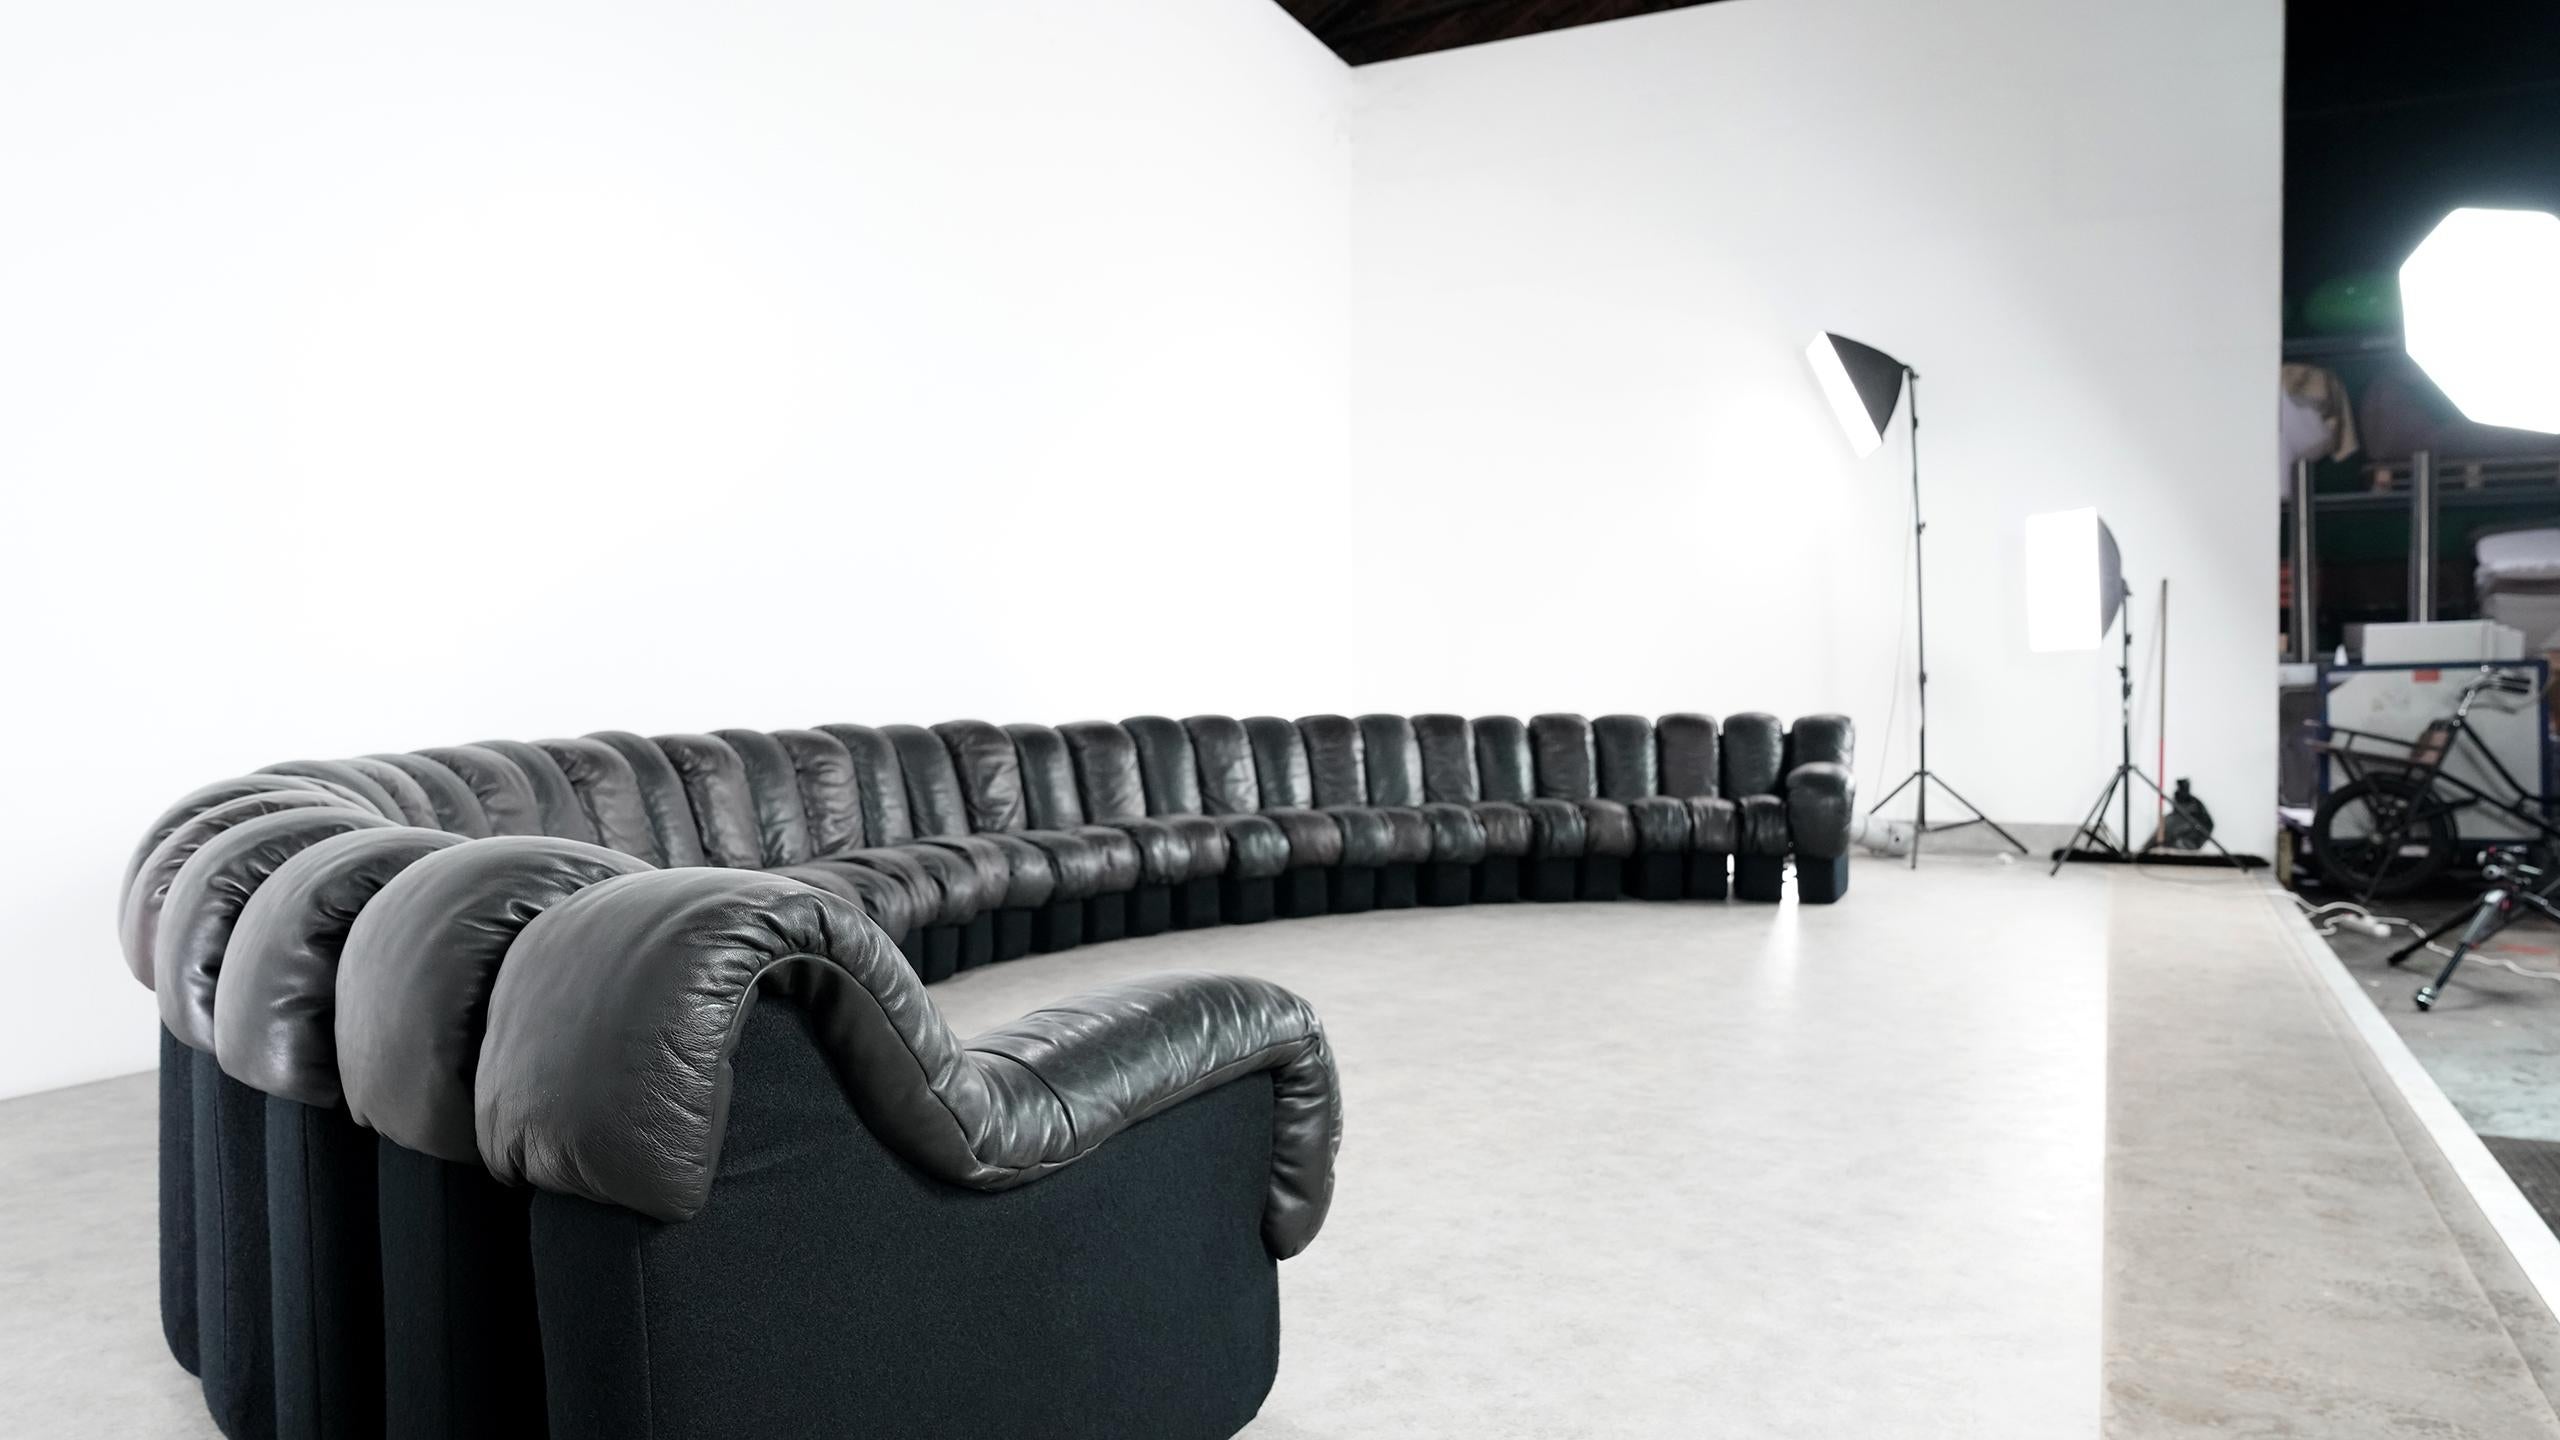 Probably the world's largest legendary De Sede sofa ever - the De Sede DS 600 in black and darkbrown leather.

Design by Ueli bergere, Eleonore Peduzzi-Riva, Heinz Ulrich, Klaus Vogt in 1972. 

The sofa comes from the Munich residence of an art